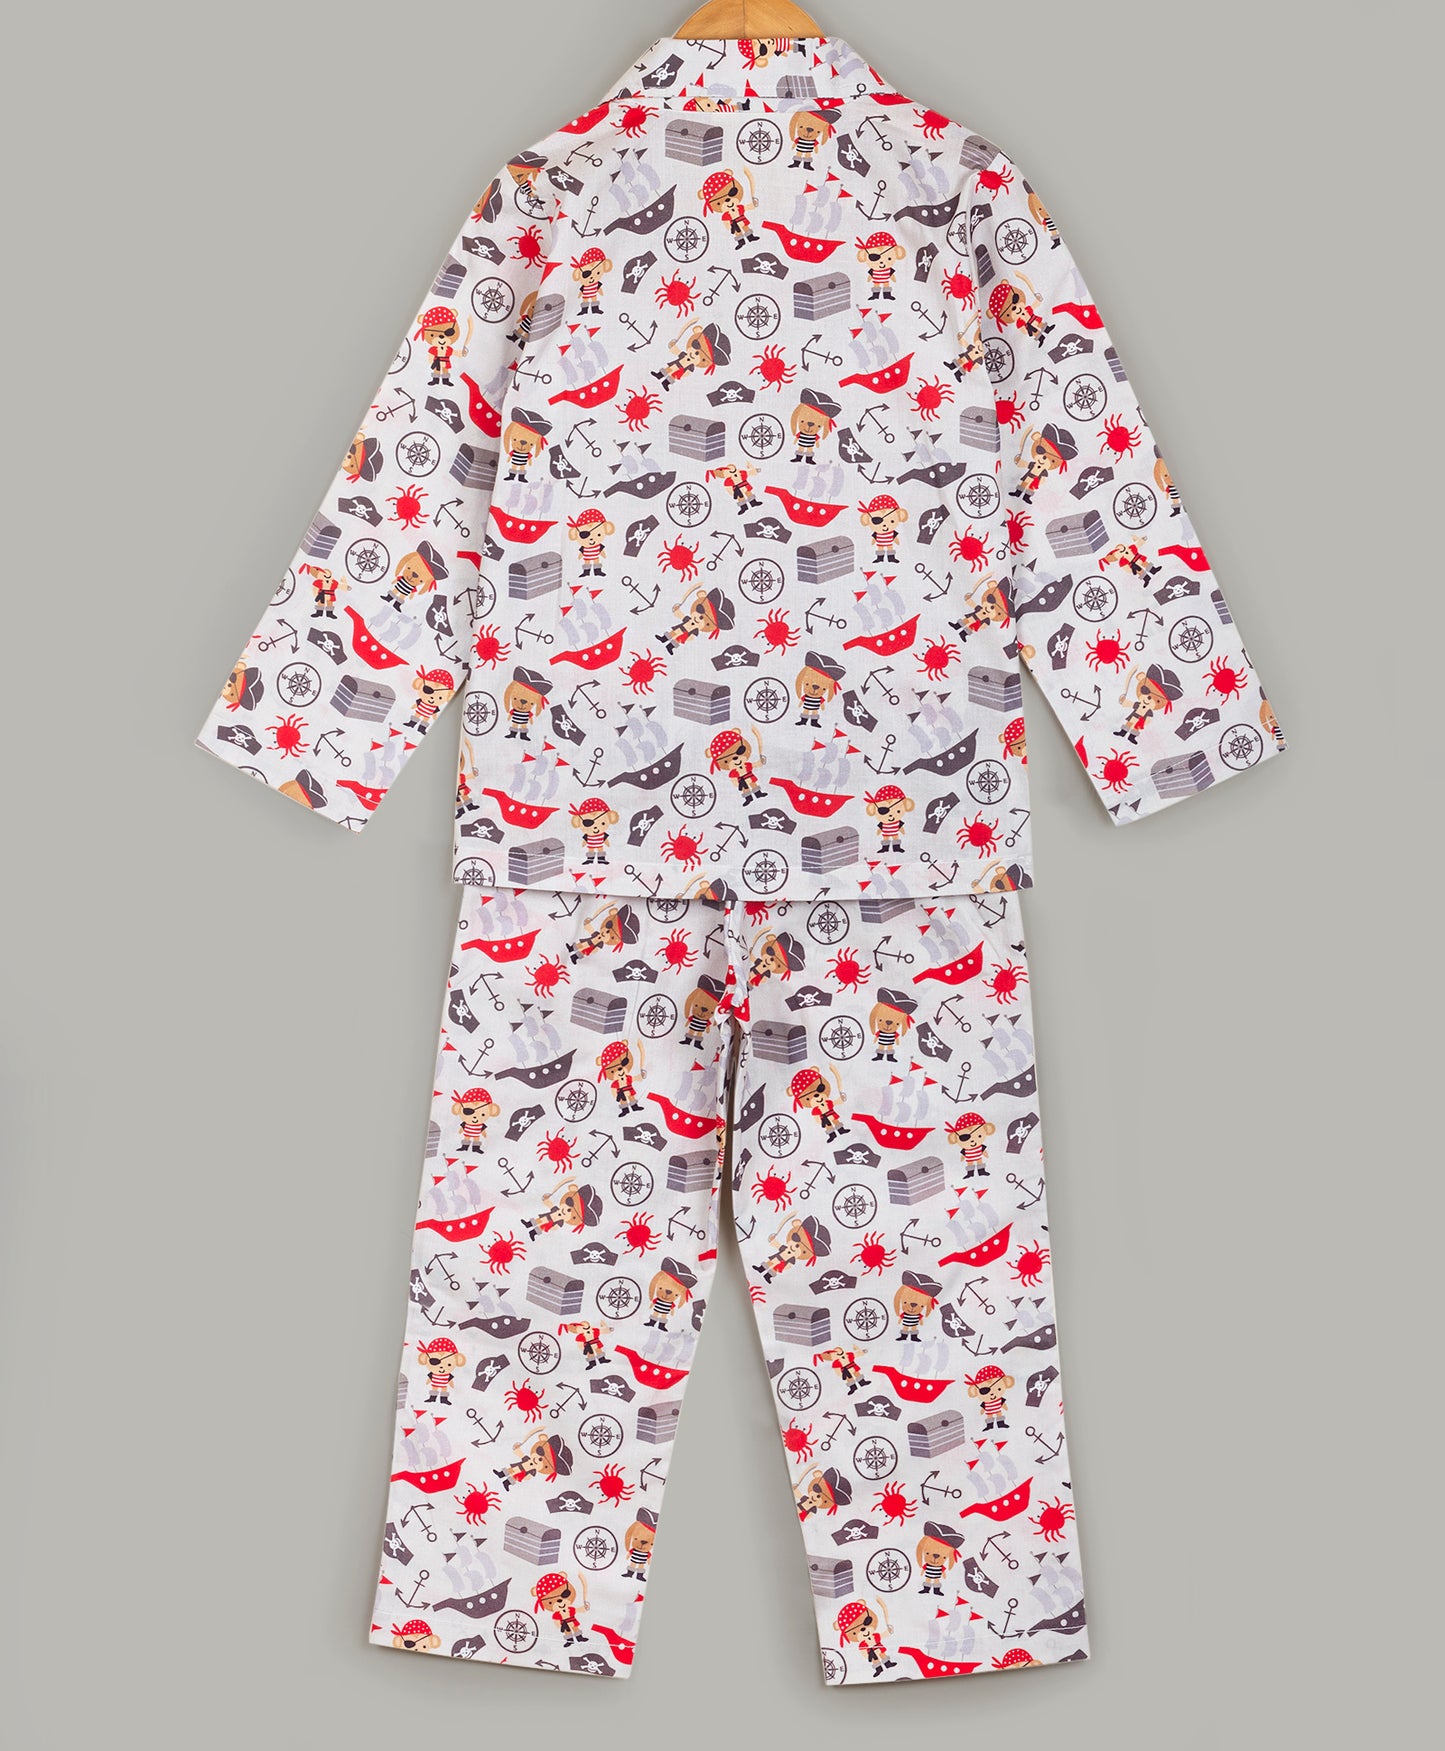 PIRATE AND SHIP PRINT NIGHTSUIT